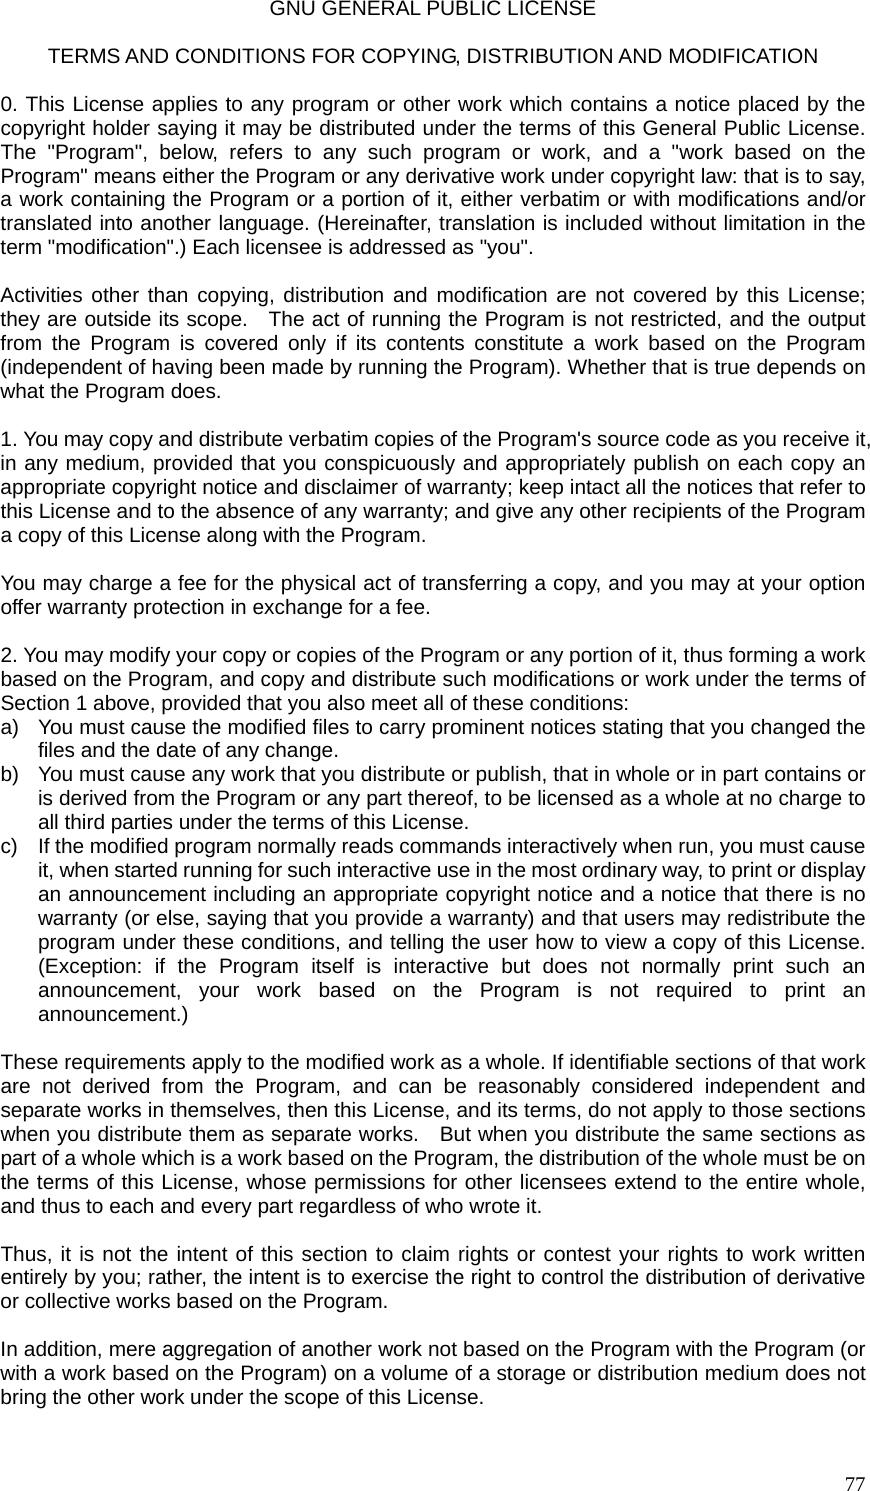  77GNU GENERAL PUBLIC LICENSE  TERMS AND CONDITIONS FOR COPYING, DISTRIBUTION AND MODIFICATION  0. This License applies to any program or other work which contains a notice placed by the copyright holder saying it may be distributed under the terms of this General Public License. The &quot;Program&quot;, below, refers to any such program or work, and a &quot;work based on the Program&quot; means either the Program or any derivative work under copyright law: that is to say, a work containing the Program or a portion of it, either verbatim or with modifications and/or translated into another language. (Hereinafter, translation is included without limitation in the term &quot;modification&quot;.) Each licensee is addressed as &quot;you&quot;.  Activities other than copying, distribution and modification are not covered by this License; they are outside its scope.   The act of running the Program is not restricted, and the output from the Program is covered only if its contents constitute a work based on the Program (independent of having been made by running the Program). Whether that is true depends on what the Program does.  1. You may copy and distribute verbatim copies of the Program&apos;s source code as you receive it, in any medium, provided that you conspicuously and appropriately publish on each copy an appropriate copyright notice and disclaimer of warranty; keep intact all the notices that refer to this License and to the absence of any warranty; and give any other recipients of the Program a copy of this License along with the Program.  You may charge a fee for the physical act of transferring a copy, and you may at your option offer warranty protection in exchange for a fee.  2. You may modify your copy or copies of the Program or any portion of it, thus forming a work based on the Program, and copy and distribute such modifications or work under the terms of Section 1 above, provided that you also meet all of these conditions: a)  You must cause the modified files to carry prominent notices stating that you changed the files and the date of any change. b)  You must cause any work that you distribute or publish, that in whole or in part contains or is derived from the Program or any part thereof, to be licensed as a whole at no charge to all third parties under the terms of this License. c)  If the modified program normally reads commands interactively when run, you must cause it, when started running for such interactive use in the most ordinary way, to print or display an announcement including an appropriate copyright notice and a notice that there is no warranty (or else, saying that you provide a warranty) and that users may redistribute the program under these conditions, and telling the user how to view a copy of this License. (Exception: if the Program itself is interactive but does not normally print such an announcement, your work based on the Program is not required to print an announcement.)  These requirements apply to the modified work as a whole. If identifiable sections of that work are not derived from the Program, and can be reasonably considered independent and separate works in themselves, then this License, and its terms, do not apply to those sections when you distribute them as separate works.    But when you distribute the same sections as part of a whole which is a work based on the Program, the distribution of the whole must be on the terms of this License, whose permissions for other licensees extend to the entire whole, and thus to each and every part regardless of who wrote it.  Thus, it is not the intent of this section to claim rights or contest your rights to work written entirely by you; rather, the intent is to exercise the right to control the distribution of derivative or collective works based on the Program.  In addition, mere aggregation of another work not based on the Program with the Program (or with a work based on the Program) on a volume of a storage or distribution medium does not bring the other work under the scope of this License.  